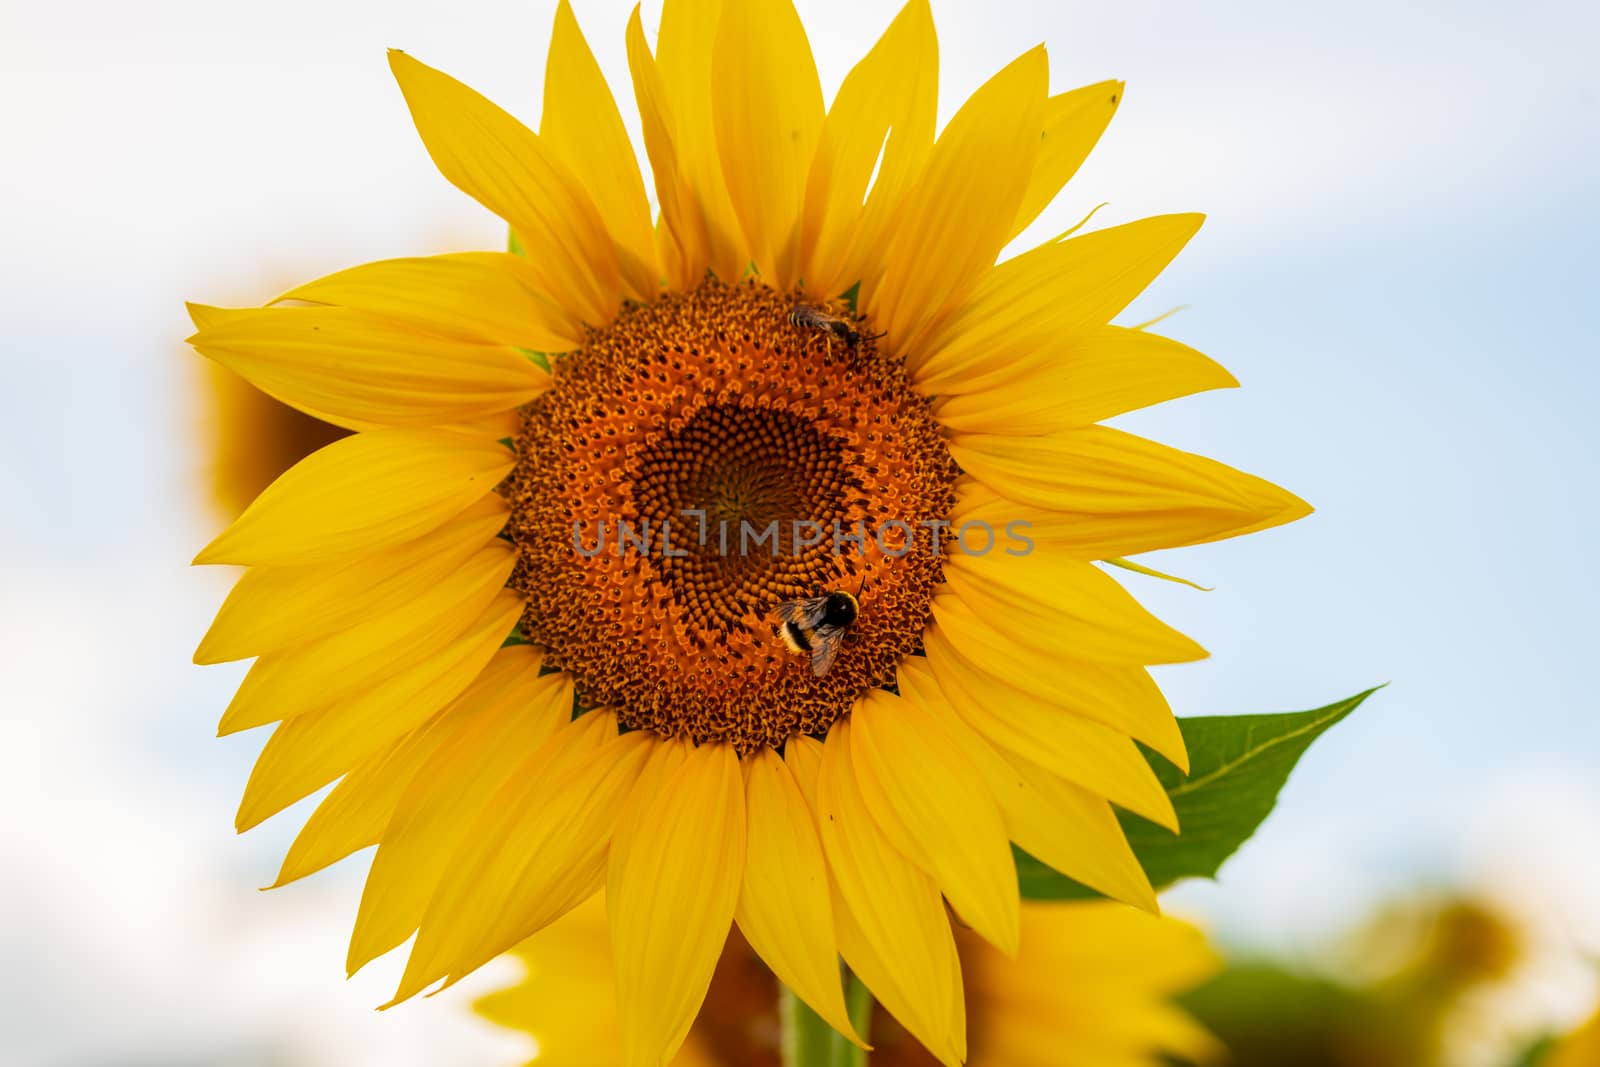 Bumblebbe, Bombus, Bombus cryptarum, on sunflower pollinating and collecting nectar by asafaric